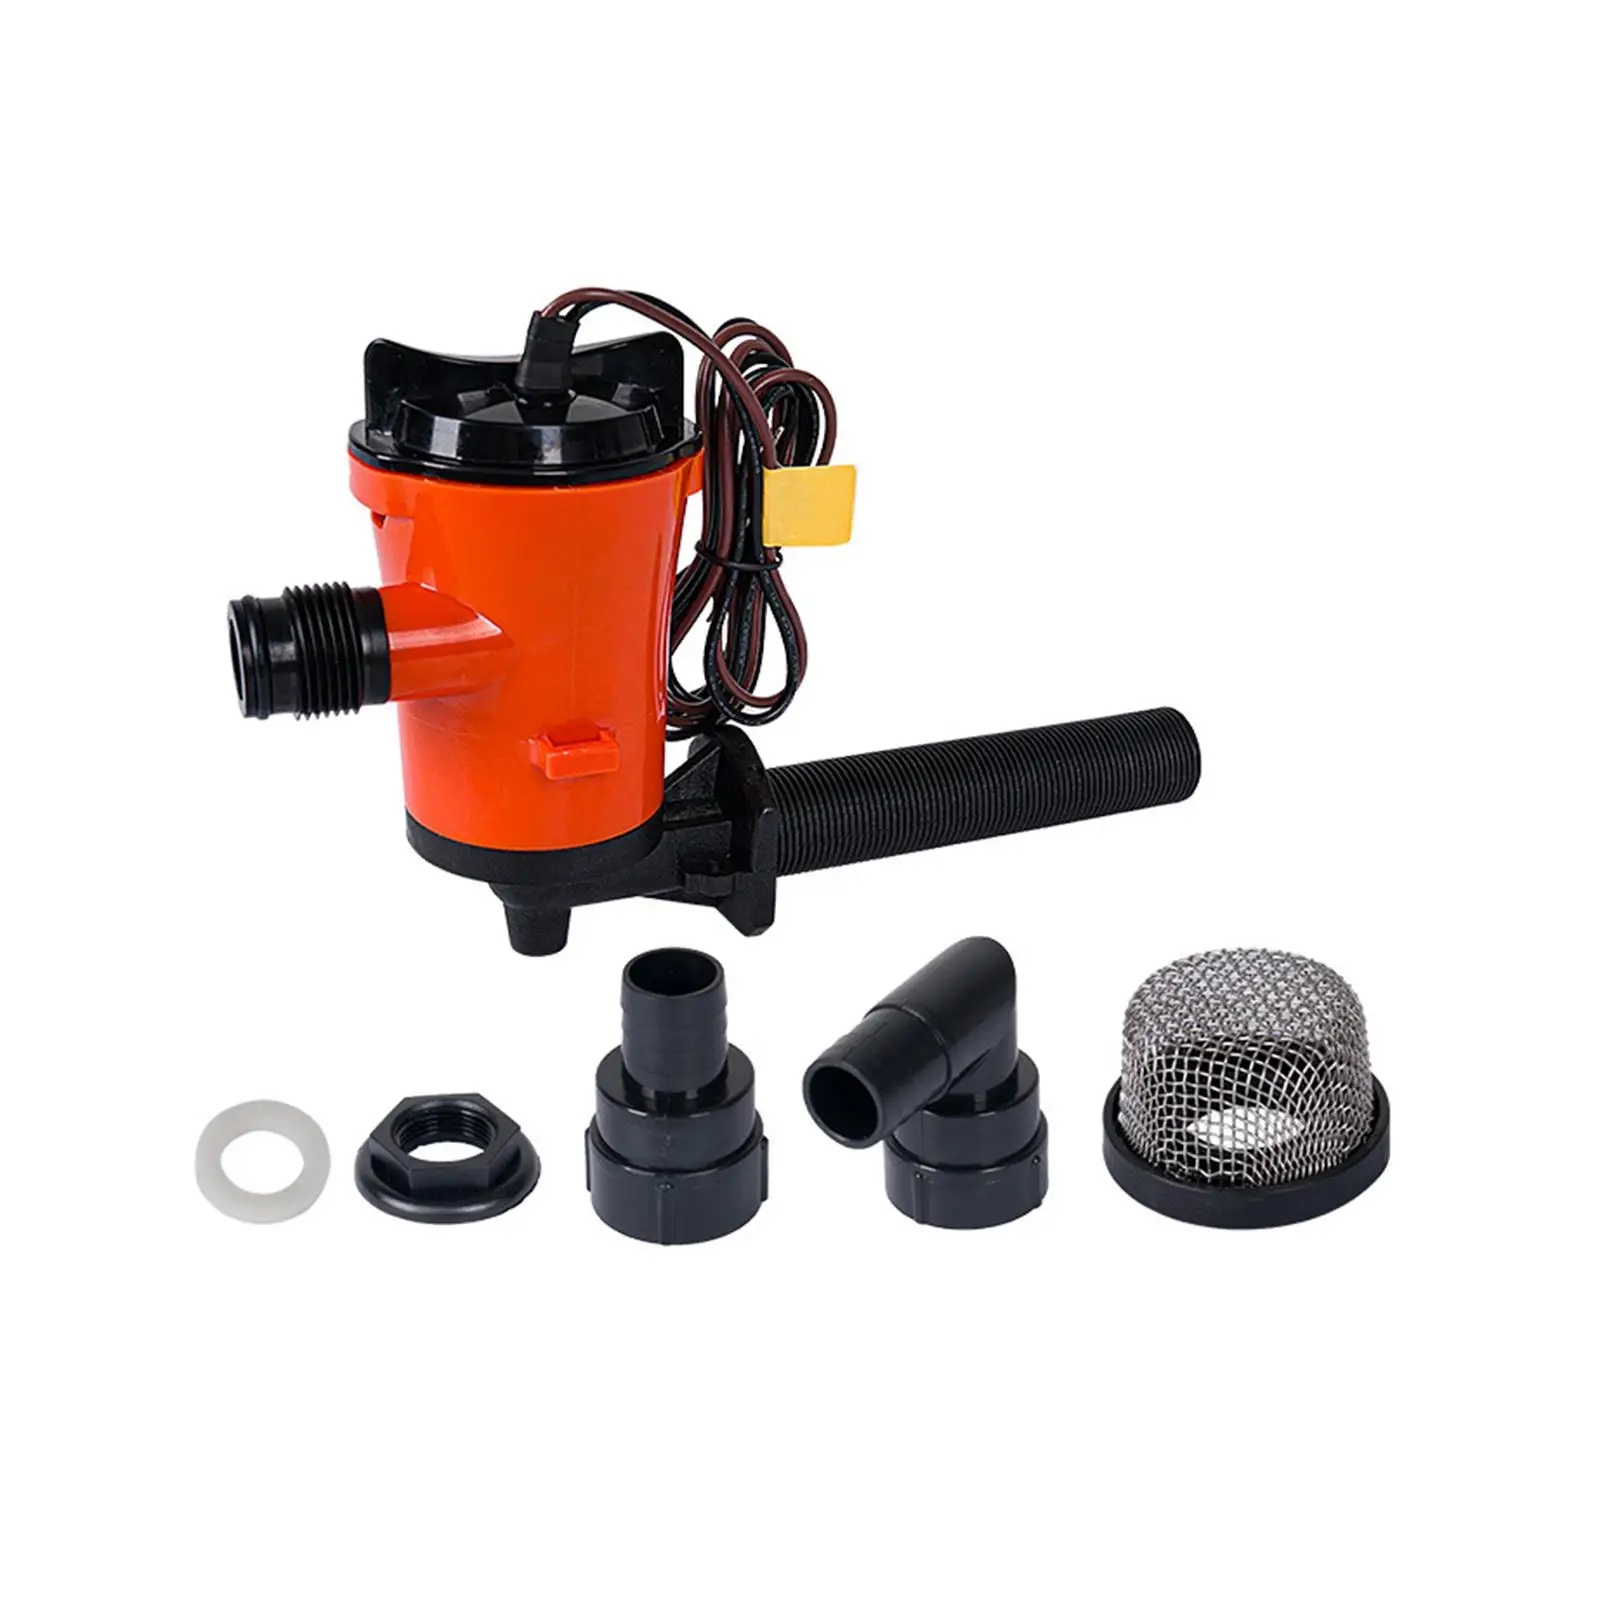 Livewell Pump for Boat Bilge Pump Easy to Install 24V 800GPH Durable Accessories Direct Replaces Easy to Clean Boat Aerator Pump